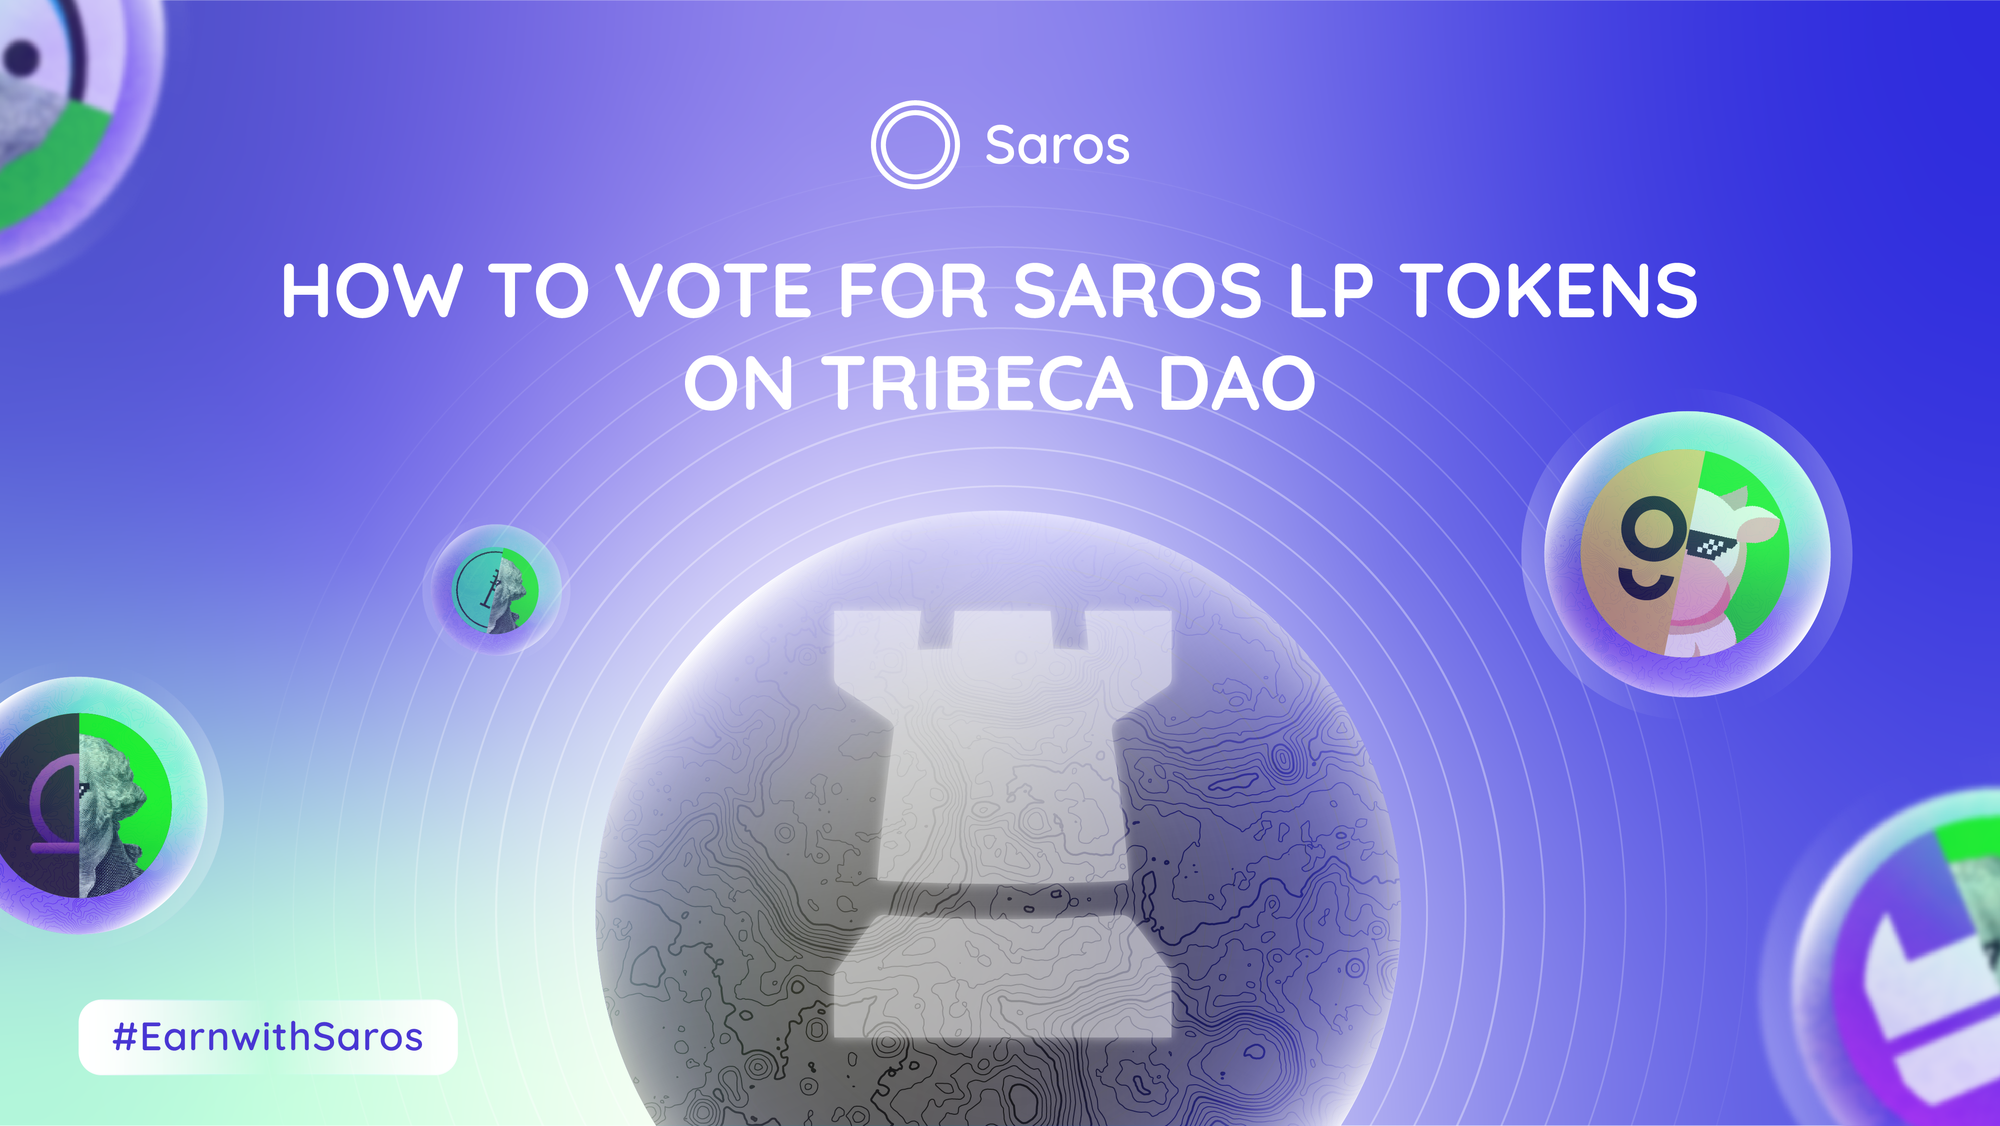 How to vote for Saros LP tokens on Tribeca DAO